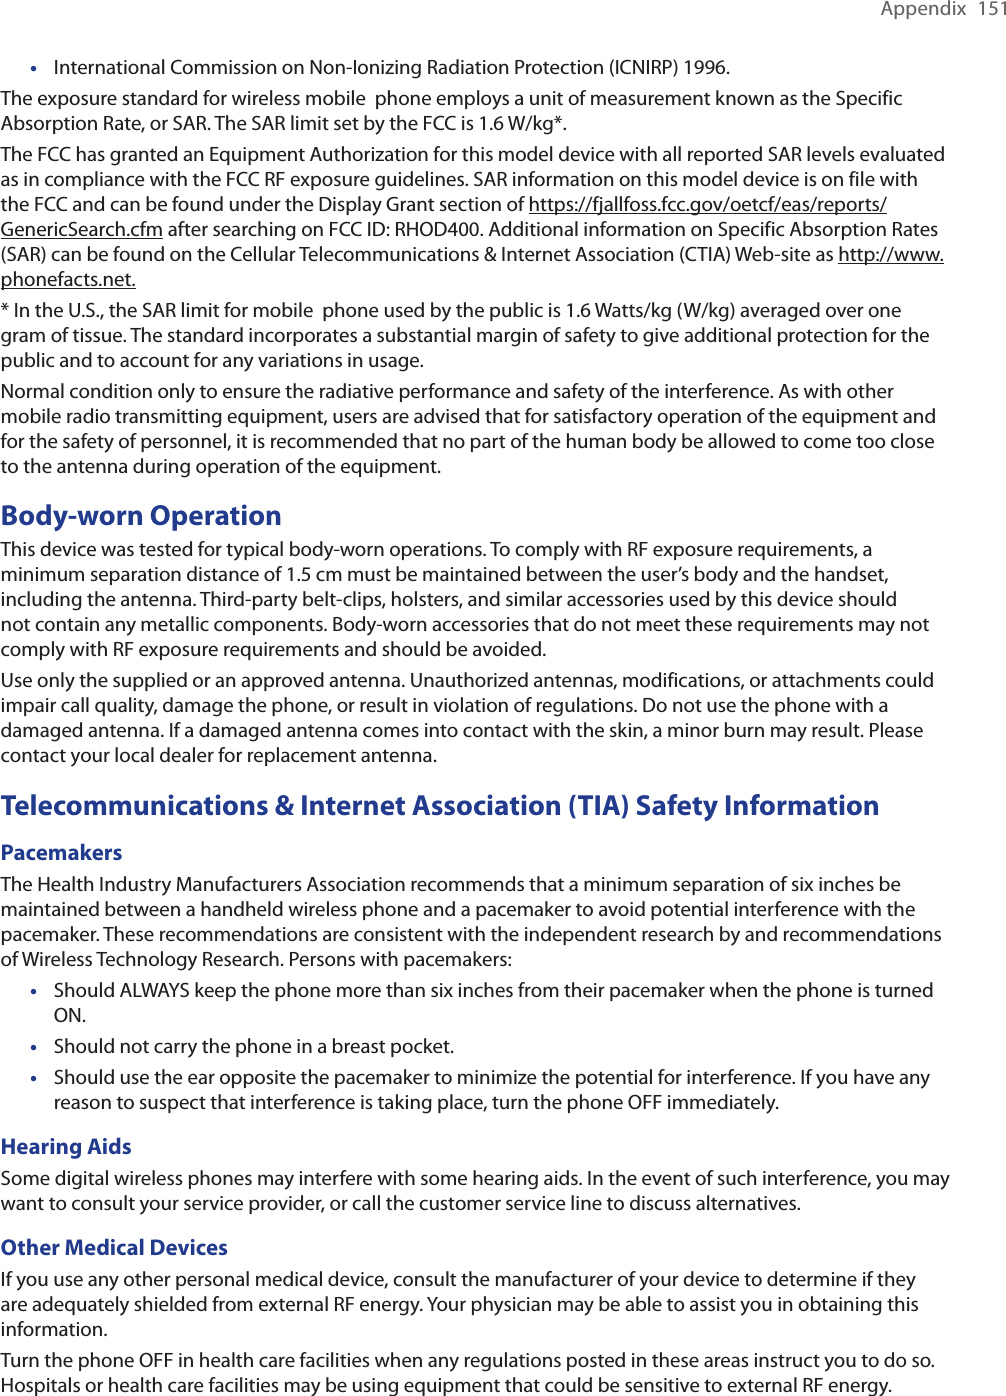 Appendix  151International Commission on Non-Ionizing Radiation Protection (ICNIRP) 1996.The exposure standard for wireless mobile  phone employs a unit of measurement known as the Specific Absorption Rate, or SAR. The SAR limit set by the FCC is 1.6 W/kg*.The FCC has granted an Equipment Authorization for this model device with all reported SAR levels evaluated as in compliance with the FCC RF exposure guidelines. SAR information on this model device is on file with the FCC and can be found under the Display Grant section of https://fjallfoss.fcc.gov/oetcf/eas/reports/GenericSearch.cfm after searching on FCC ID: RHOD400. Additional information on Specific Absorption Rates (SAR) can be found on the Cellular Telecommunications &amp; Internet Association (CTIA) Web-site as http://www.phonefacts.net.* In the U.S., the SAR limit for mobile  phone used by the public is 1.6 Watts/kg (W/kg) averaged over one gram of tissue. The standard incorporates a substantial margin of safety to give additional protection for the public and to account for any variations in usage.Normal condition only to ensure the radiative performance and safety of the interference. As with other mobile radio transmitting equipment, users are advised that for satisfactory operation of the equipment and for the safety of personnel, it is recommended that no part of the human body be allowed to come too close to the antenna during operation of the equipment.Body-worn OperationThis device was tested for typical body-worn operations. To comply with RF exposure requirements, a minimum separation distance of 1.5 cm must be maintained between the user’s body and the handset, including the antenna. Third-party belt-clips, holsters, and similar accessories used by this device should not contain any metallic components. Body-worn accessories that do not meet these requirements may not comply with RF exposure requirements and should be avoided.Use only the supplied or an approved antenna. Unauthorized antennas, modifications, or attachments could impair call quality, damage the phone, or result in violation of regulations. Do not use the phone with a damaged antenna. If a damaged antenna comes into contact with the skin, a minor burn may result. Please contact your local dealer for replacement antenna.Telecommunications &amp; Internet Association (TIA) Safety InformationPacemakersThe Health Industry Manufacturers Association recommends that a minimum separation of six inches be maintained between a handheld wireless phone and a pacemaker to avoid potential interference with the pacemaker. These recommendations are consistent with the independent research by and recommendations of Wireless Technology Research. Persons with pacemakers:Should ALWAYS keep the phone more than six inches from their pacemaker when the phone is turned ON. Should not carry the phone in a breast pocket. Should use the ear opposite the pacemaker to minimize the potential for interference. If you have any reason to suspect that interference is taking place, turn the phone OFF immediately. Hearing AidsSome digital wireless phones may interfere with some hearing aids. In the event of such interference, you may want to consult your service provider, or call the customer service line to discuss alternatives.Other Medical DevicesIf you use any other personal medical device, consult the manufacturer of your device to determine if they are adequately shielded from external RF energy. Your physician may be able to assist you in obtaining this information. Turn the phone OFF in health care facilities when any regulations posted in these areas instruct you to do so. Hospitals or health care facilities may be using equipment that could be sensitive to external RF energy.••••